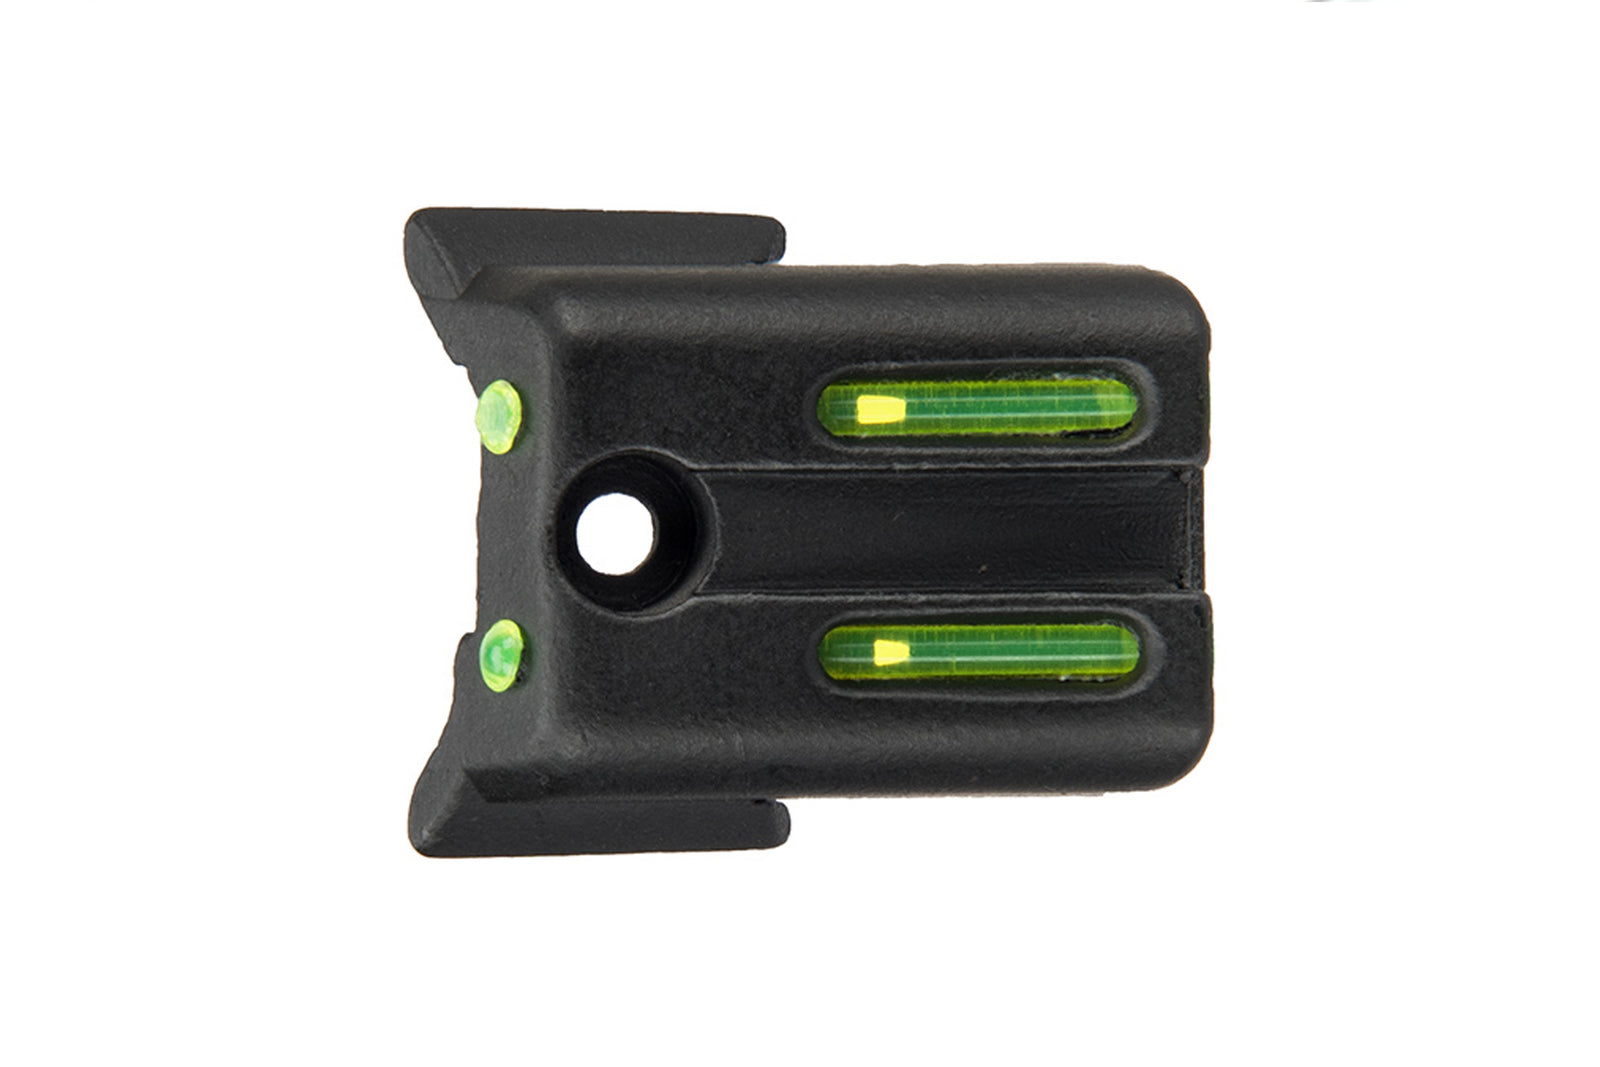 Army Armament Fiber Optic Rear Sight for 1911 Style Airsoft Pistols